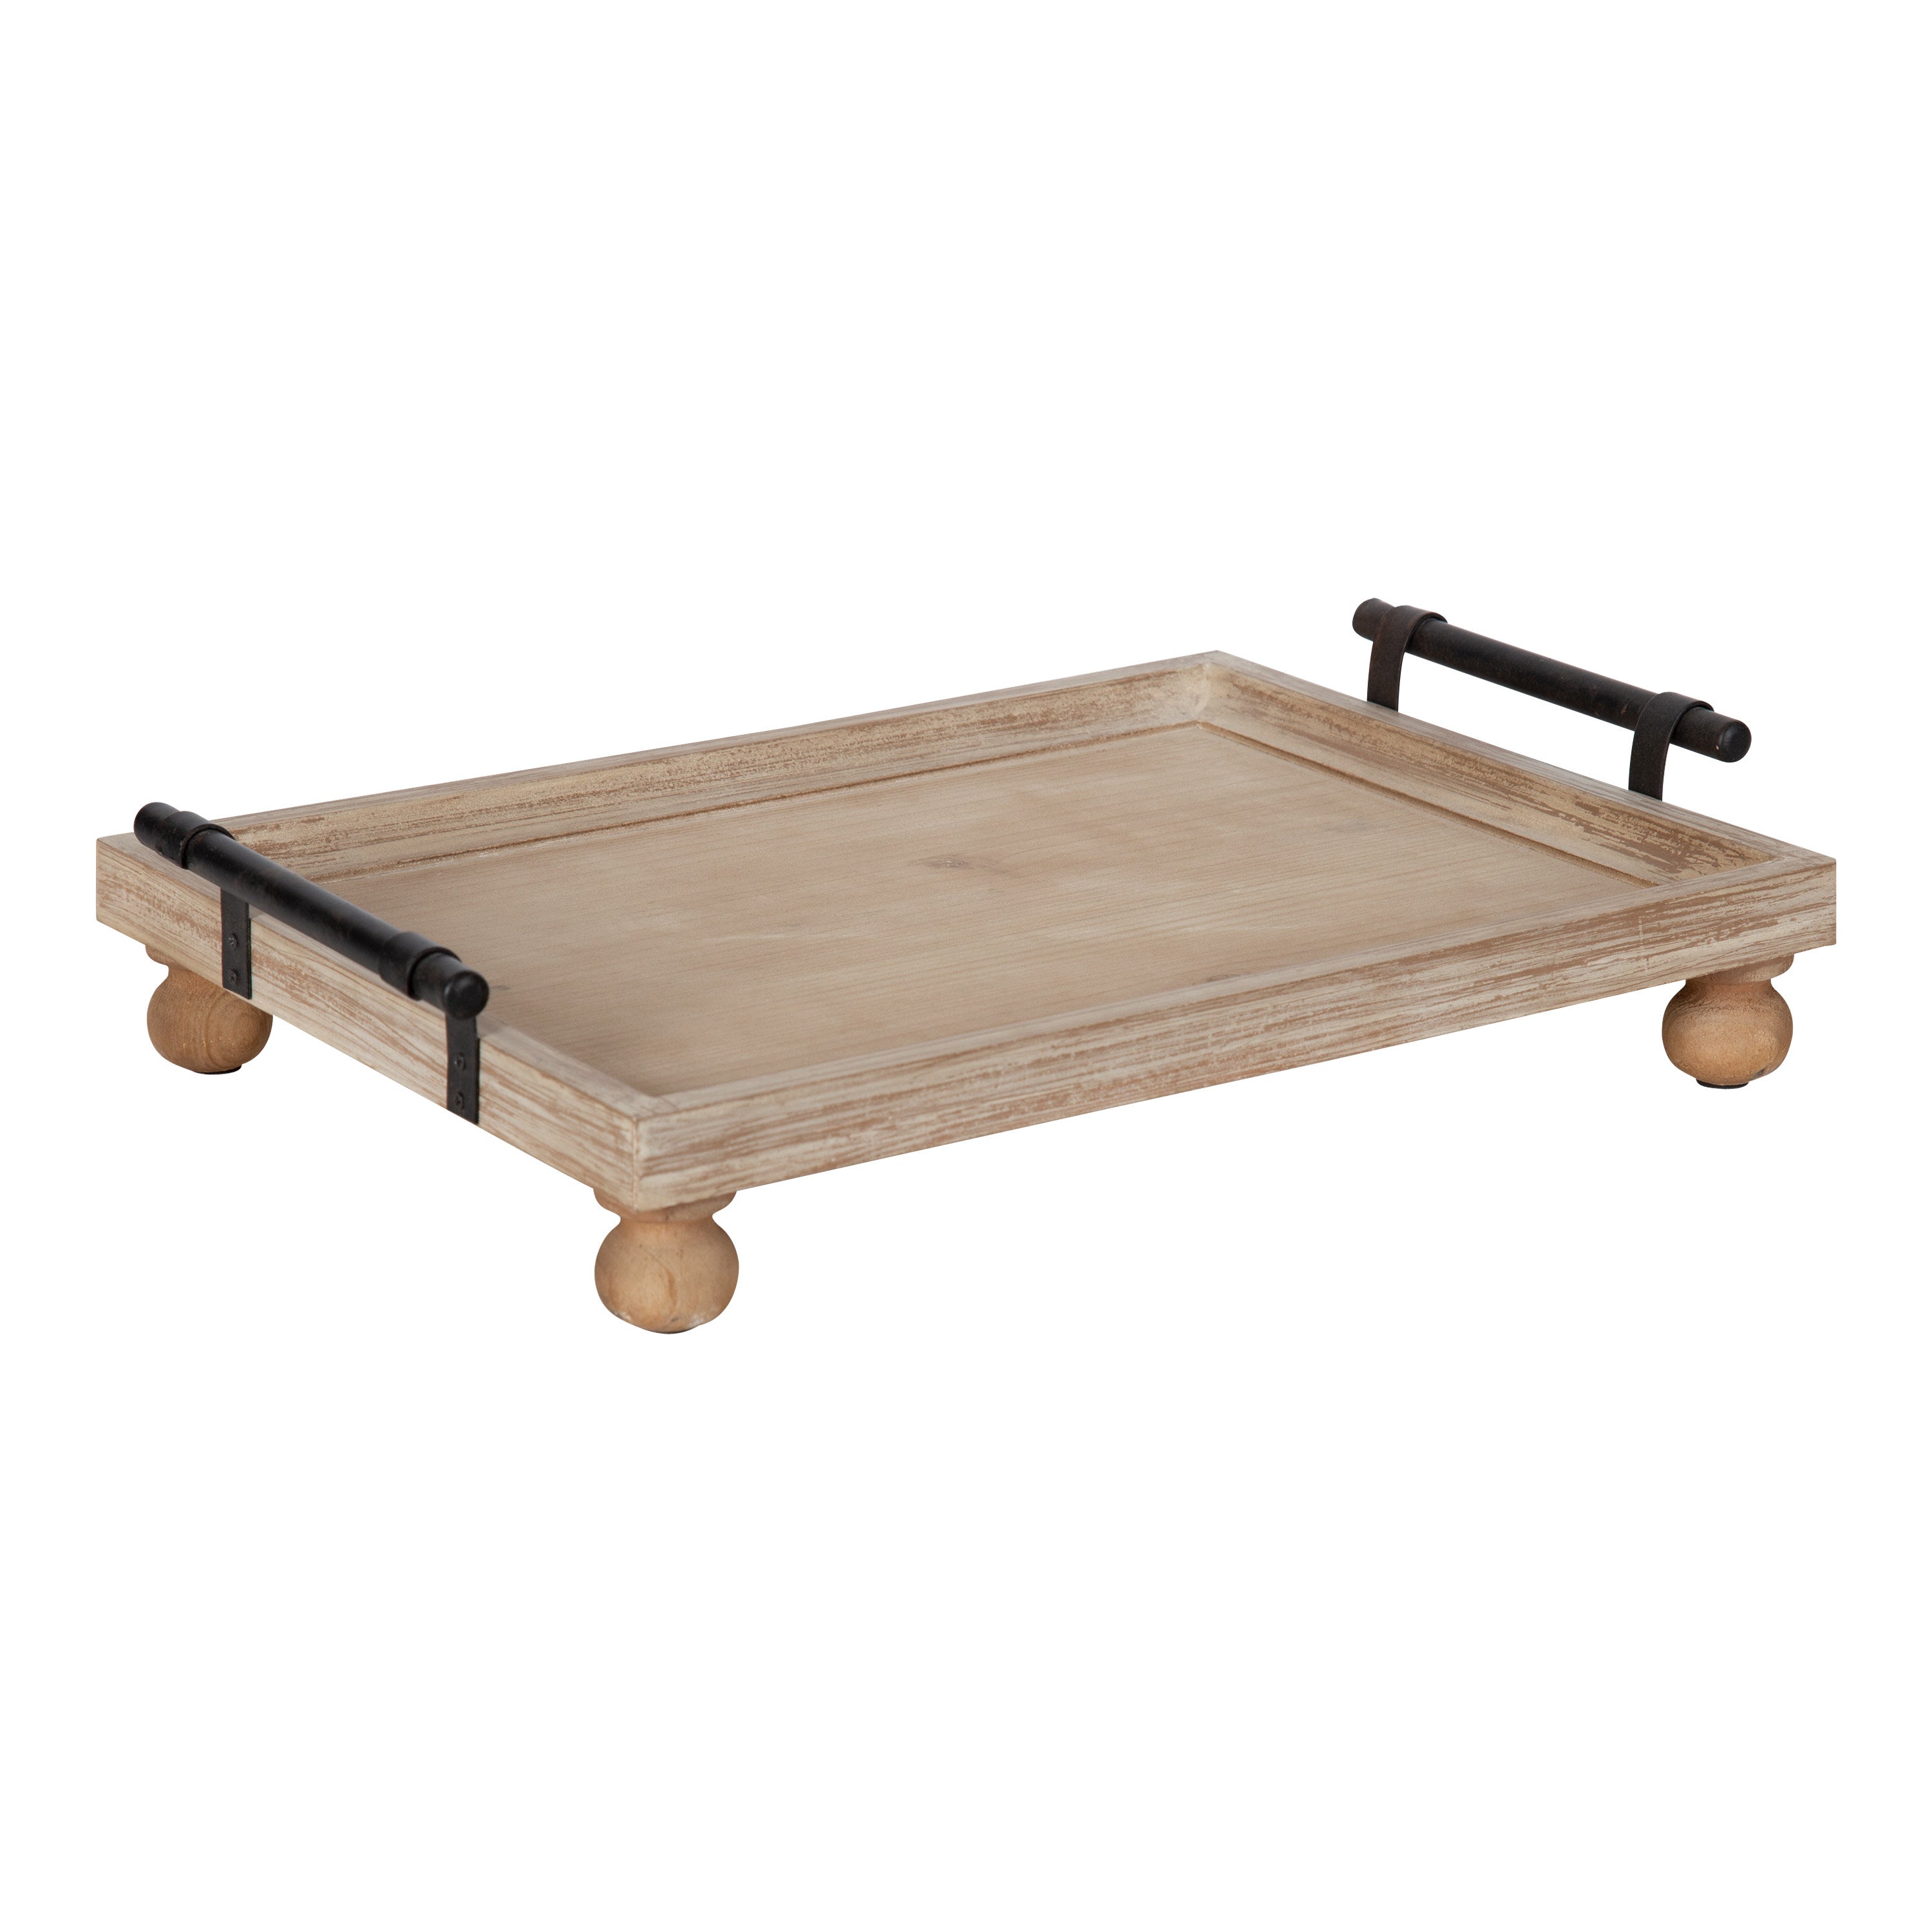 Bruillet Wooden Footed Tray